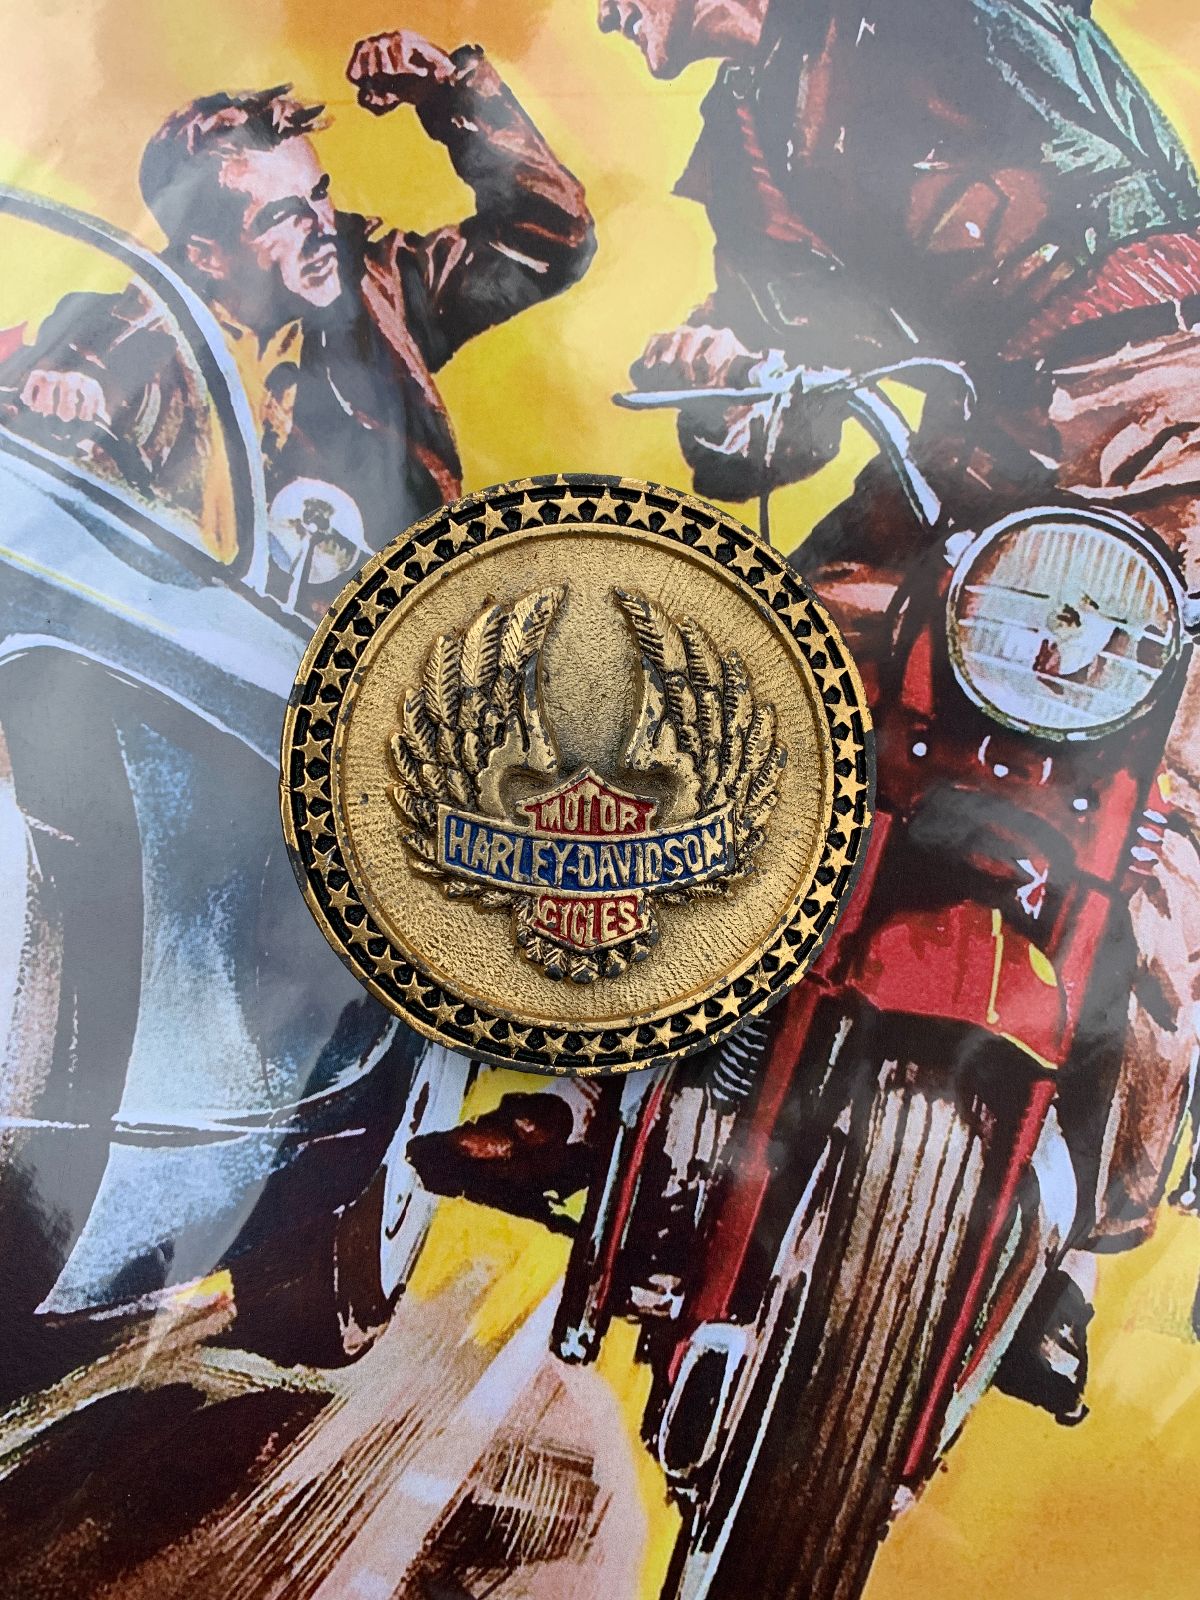 product details: AWESOMELY RUGGED 1976 HARLEY DAVIDSON GOLD BELT BUCKLE photo